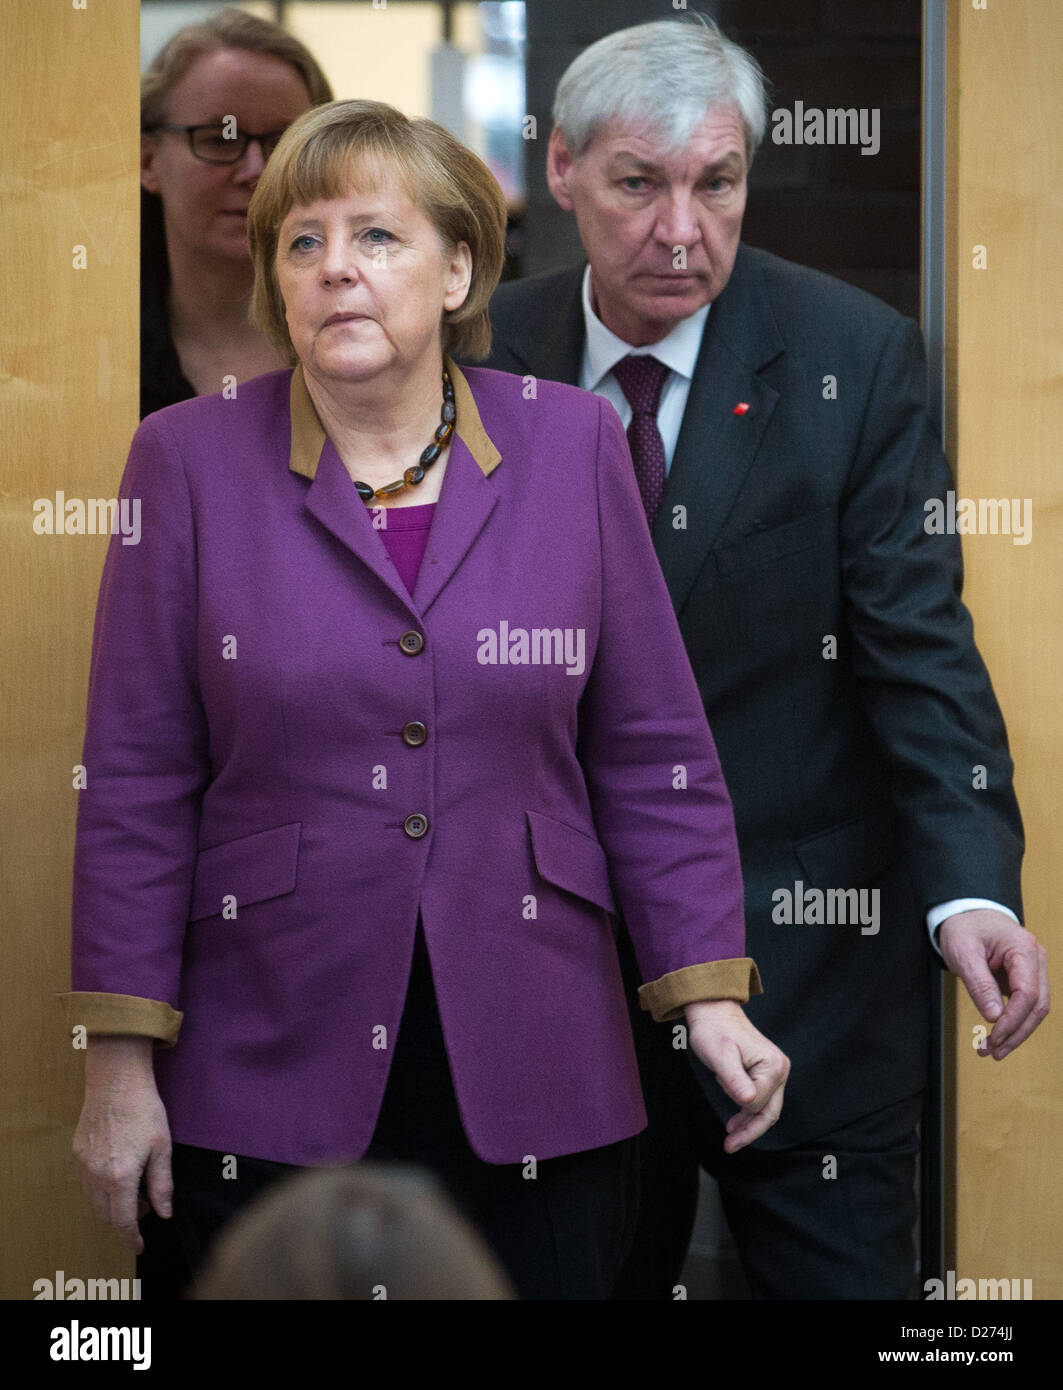 German Chancellor Angela Merkel arrives to a press conference next to ...